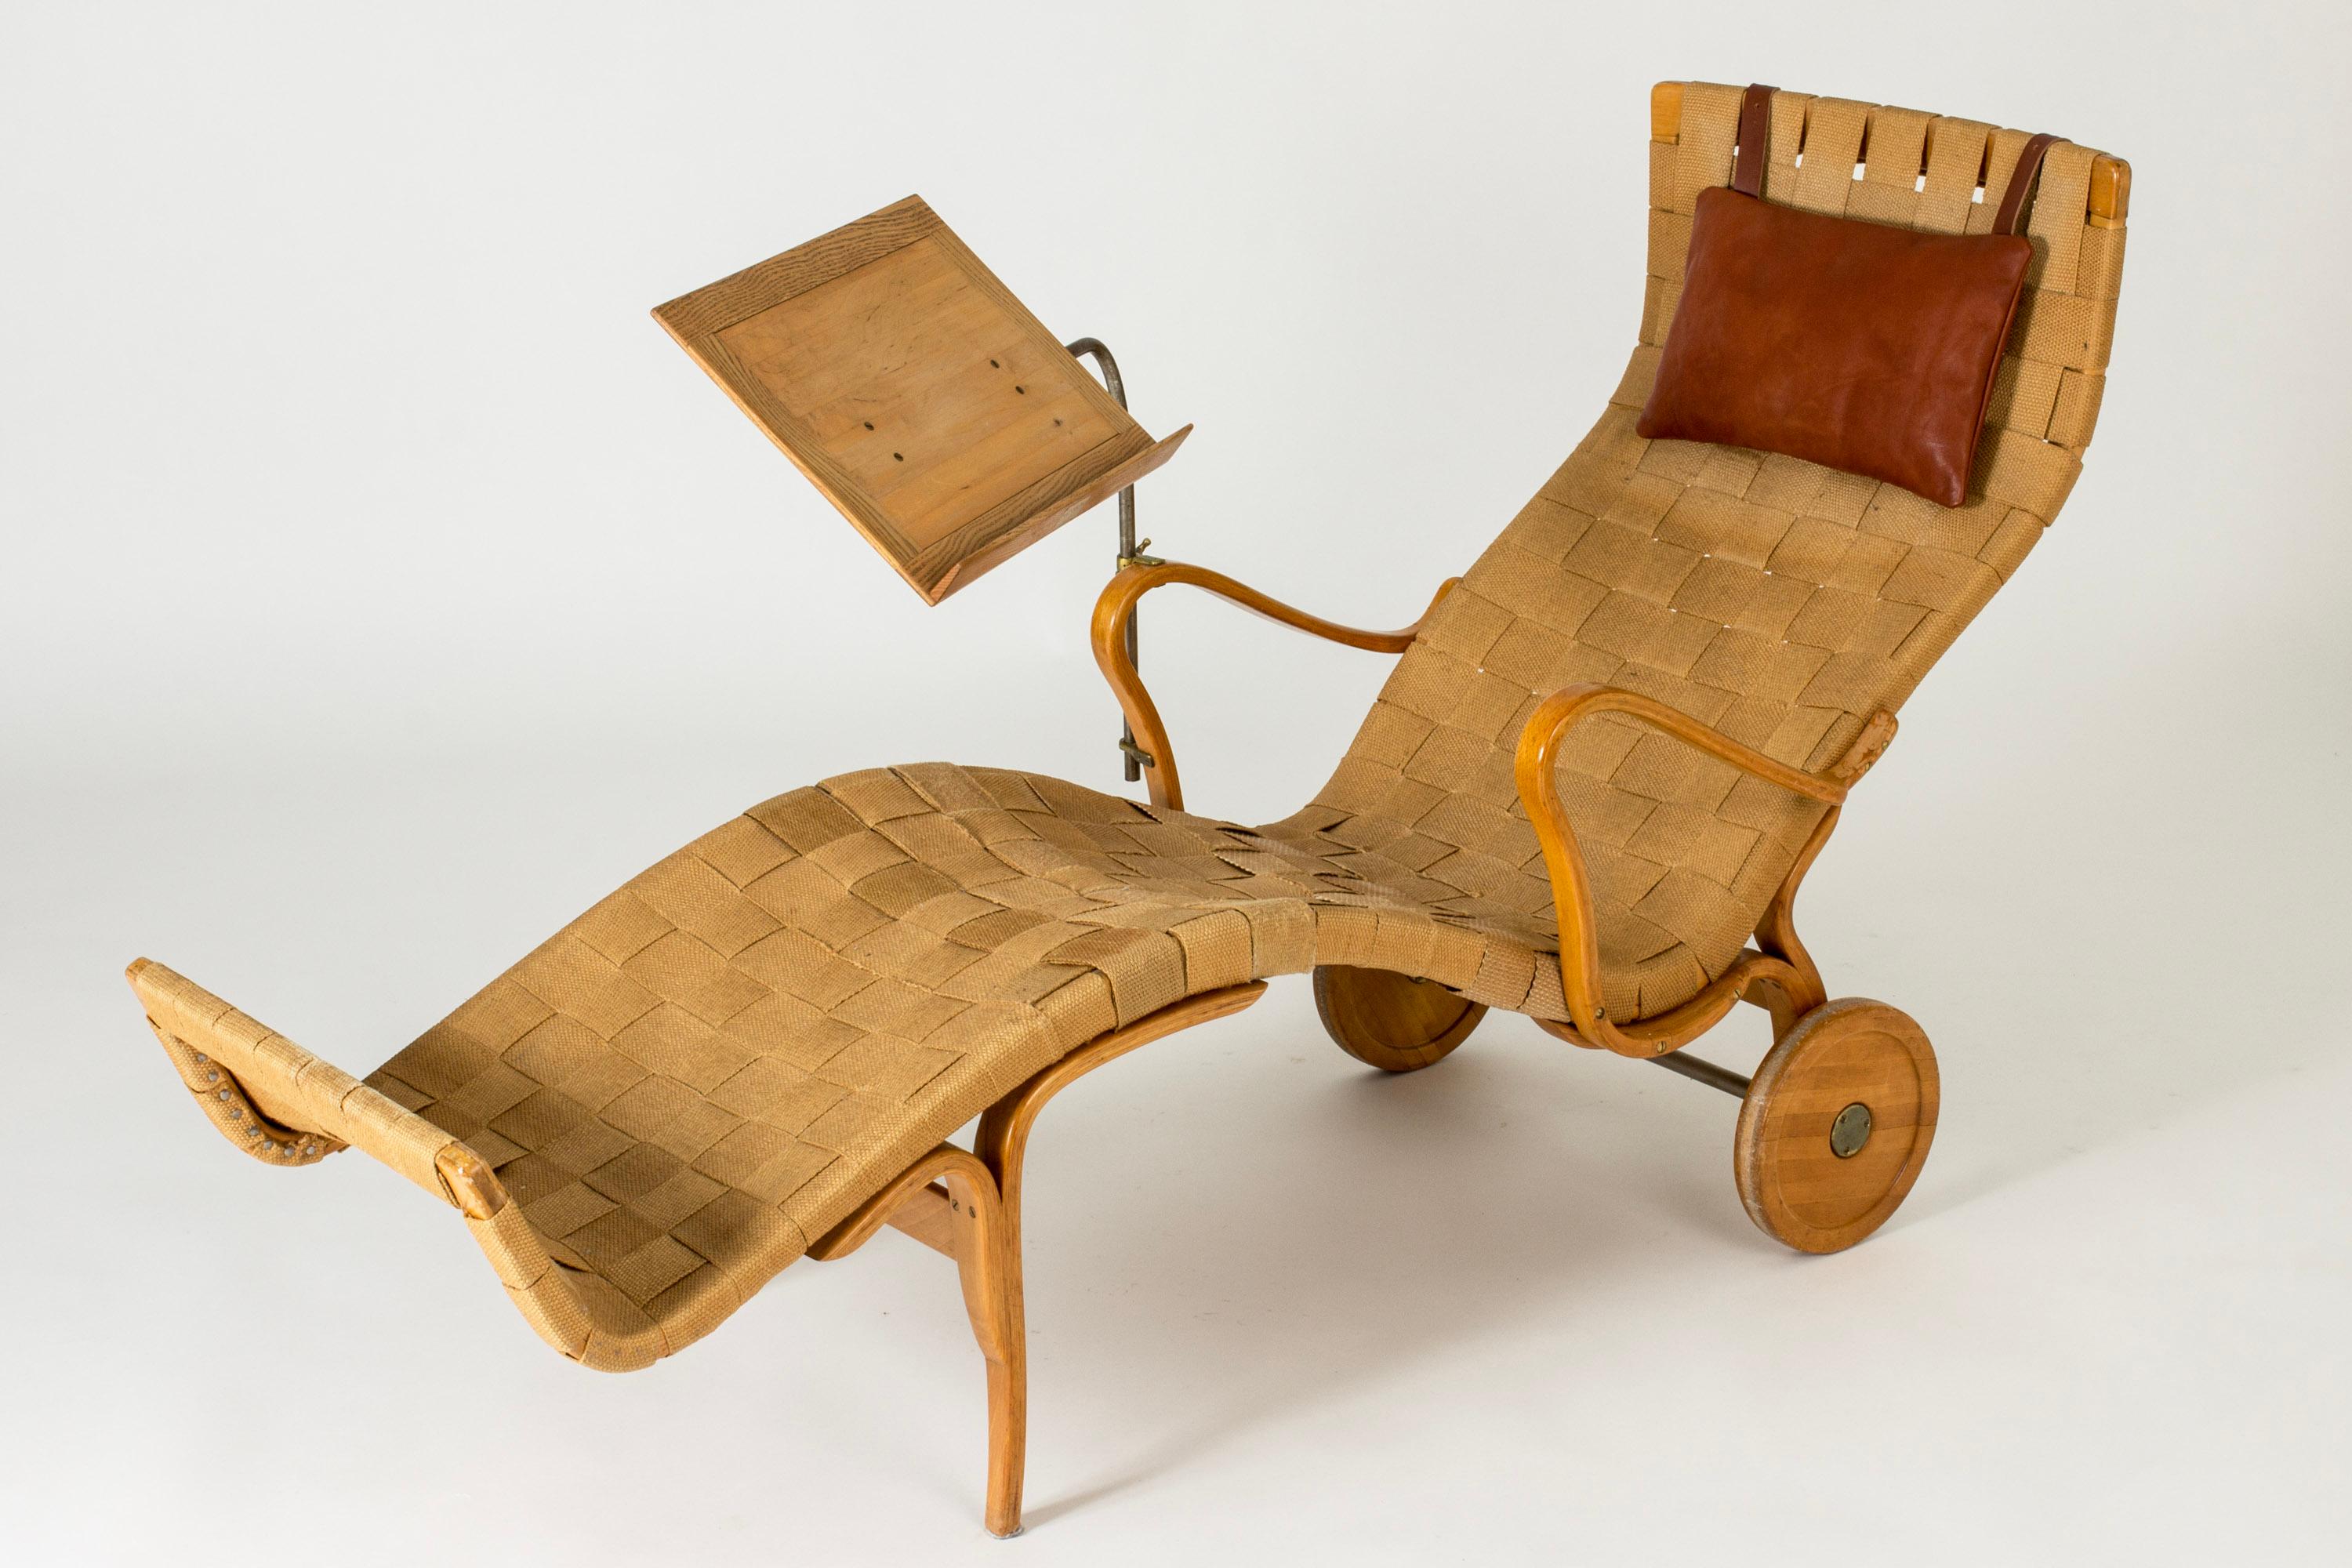 Rare, early edition “Pernilla” chaise lounge with wheels by Bruno Mathsson. Made from solid birch with curved lines. Original wreathed paper webbing, leather neck cushion.